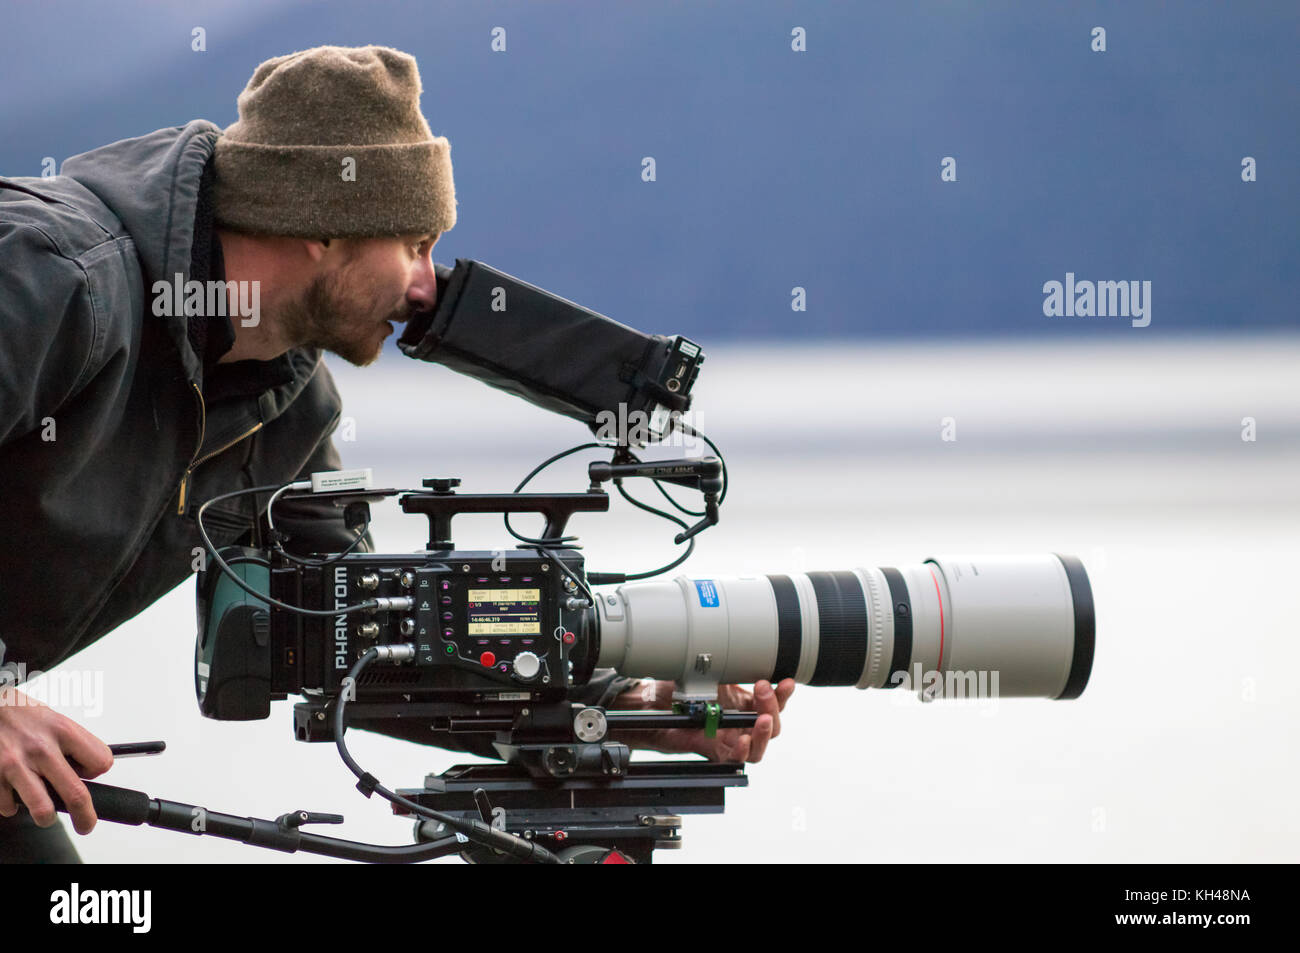 Nick operating the high speed Phantom Flex 4K video camera with the Canon 200-400mm f4.0 zoom lens on a shoot in Alaska, USA. Shooting at 960 fps. at  Stock Photo